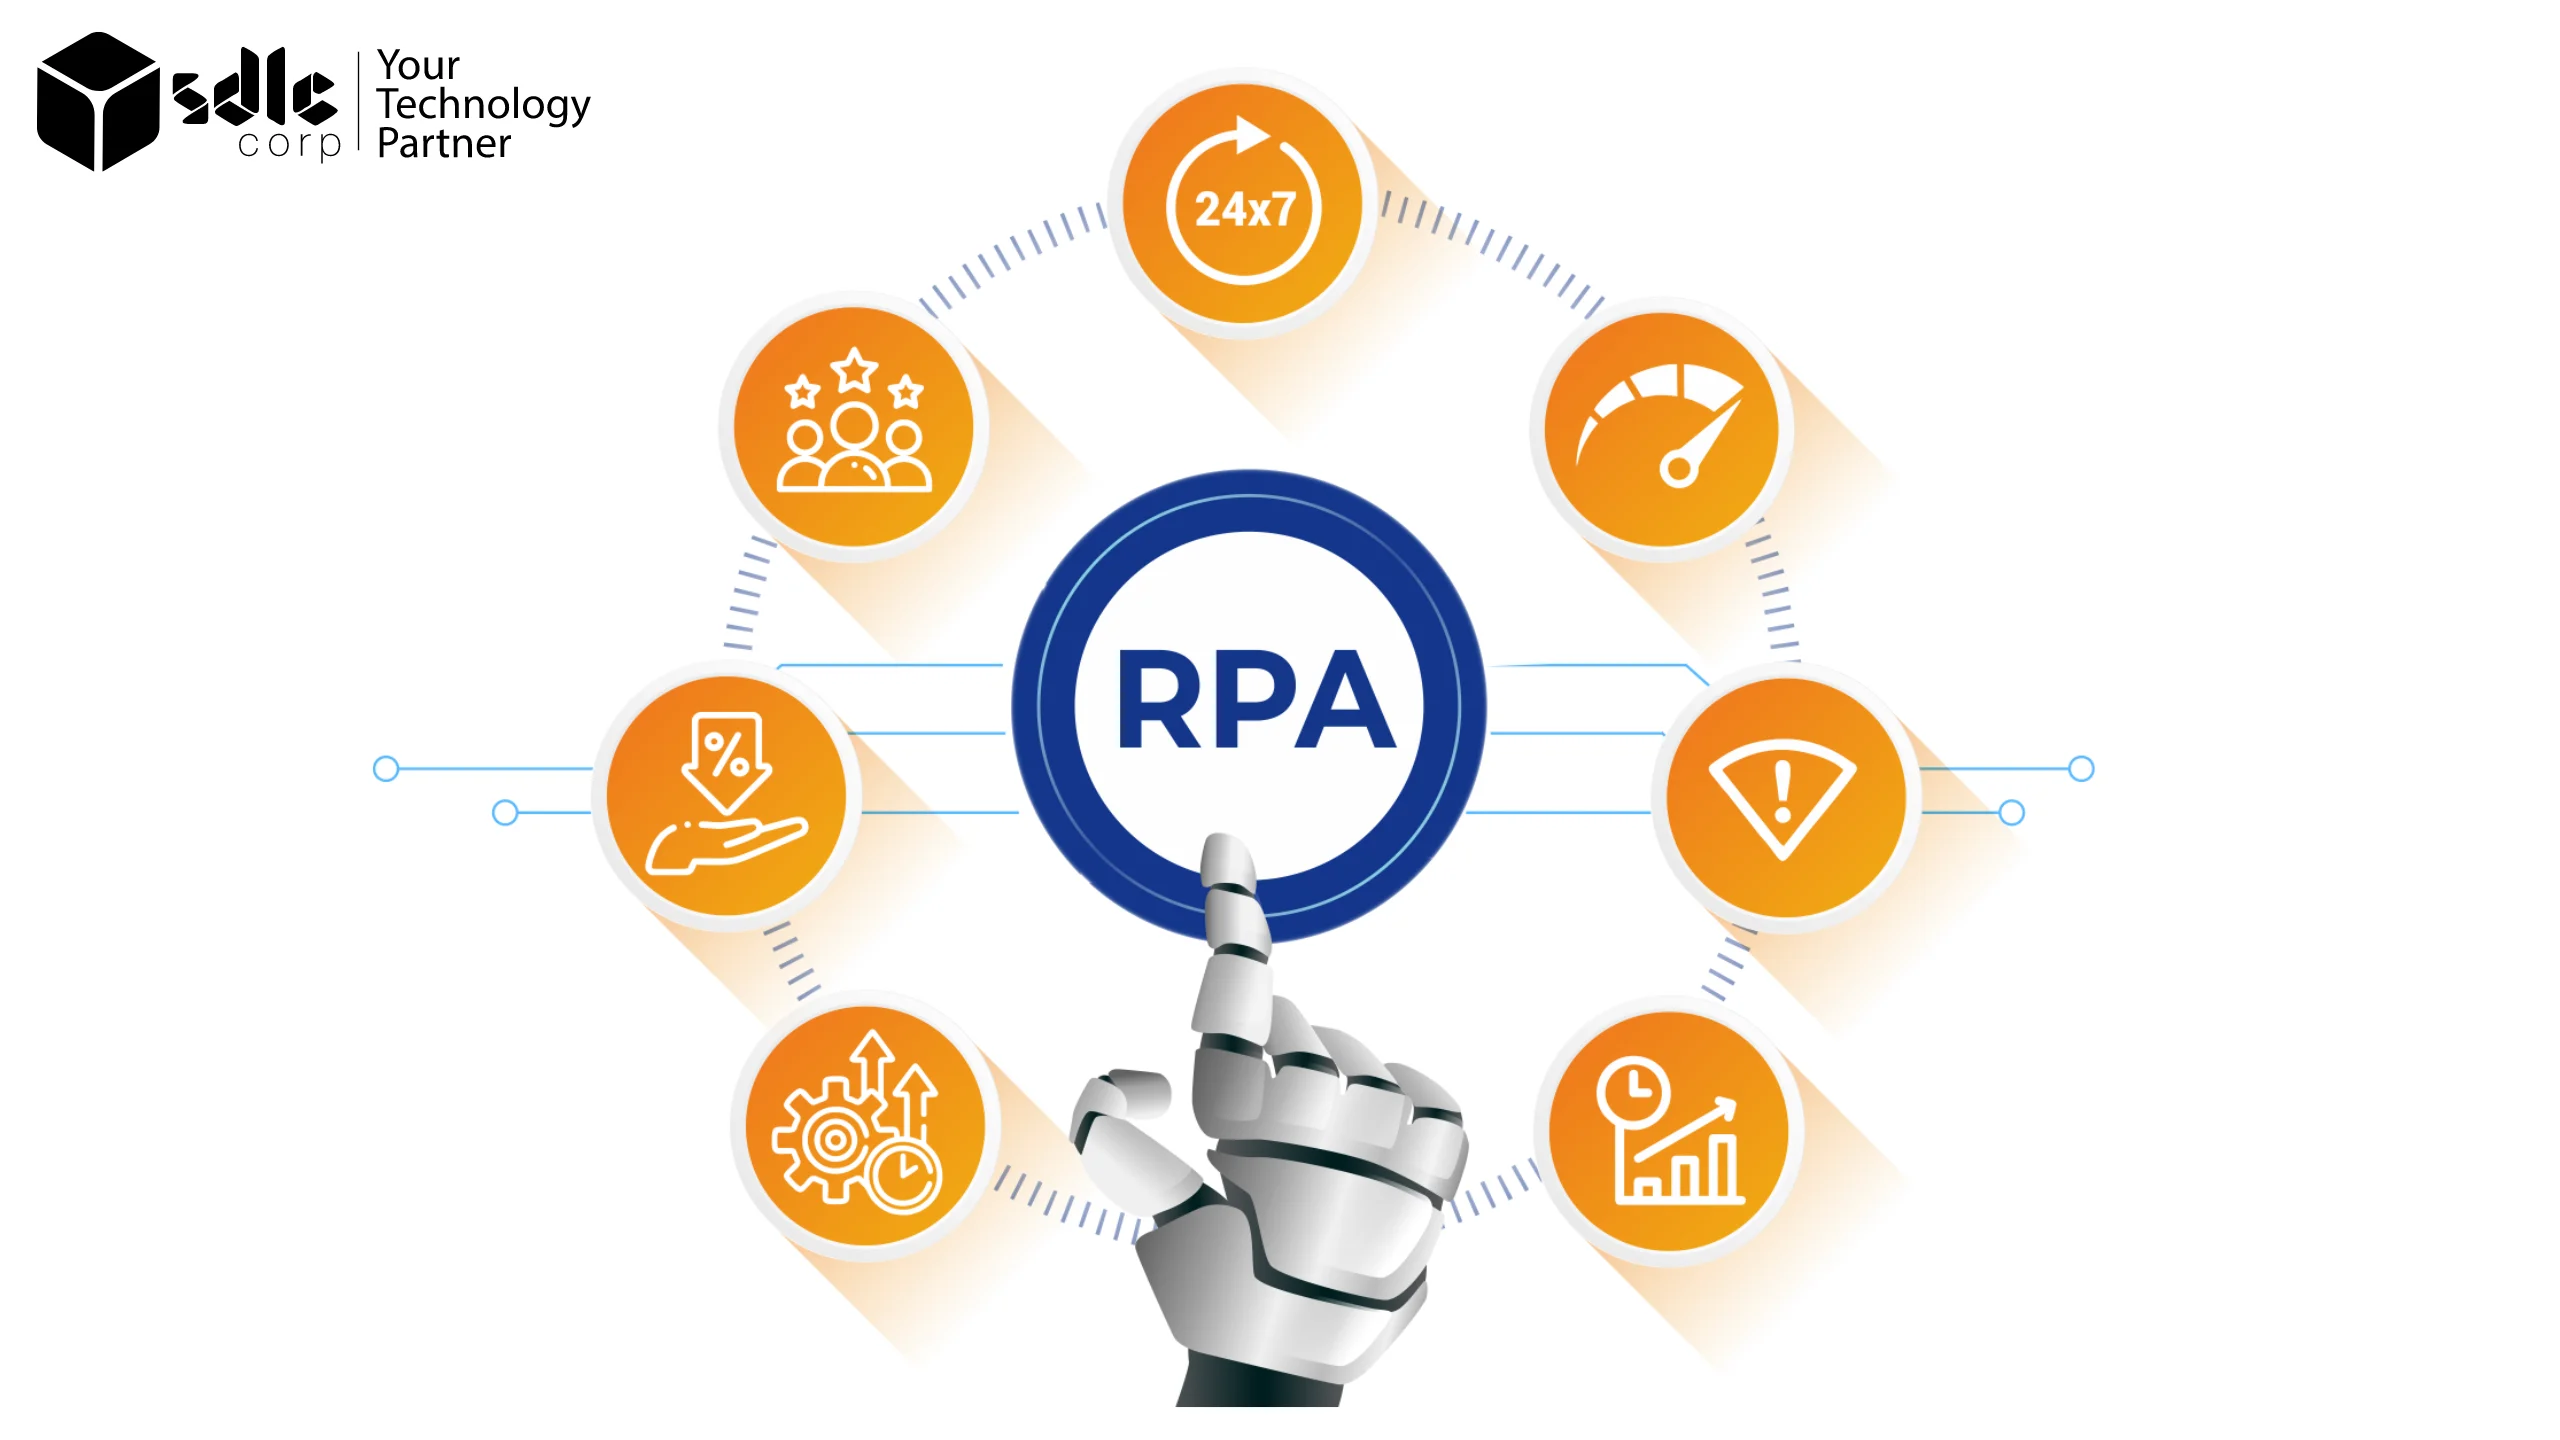 RPA is considered a game changer for many businesses.